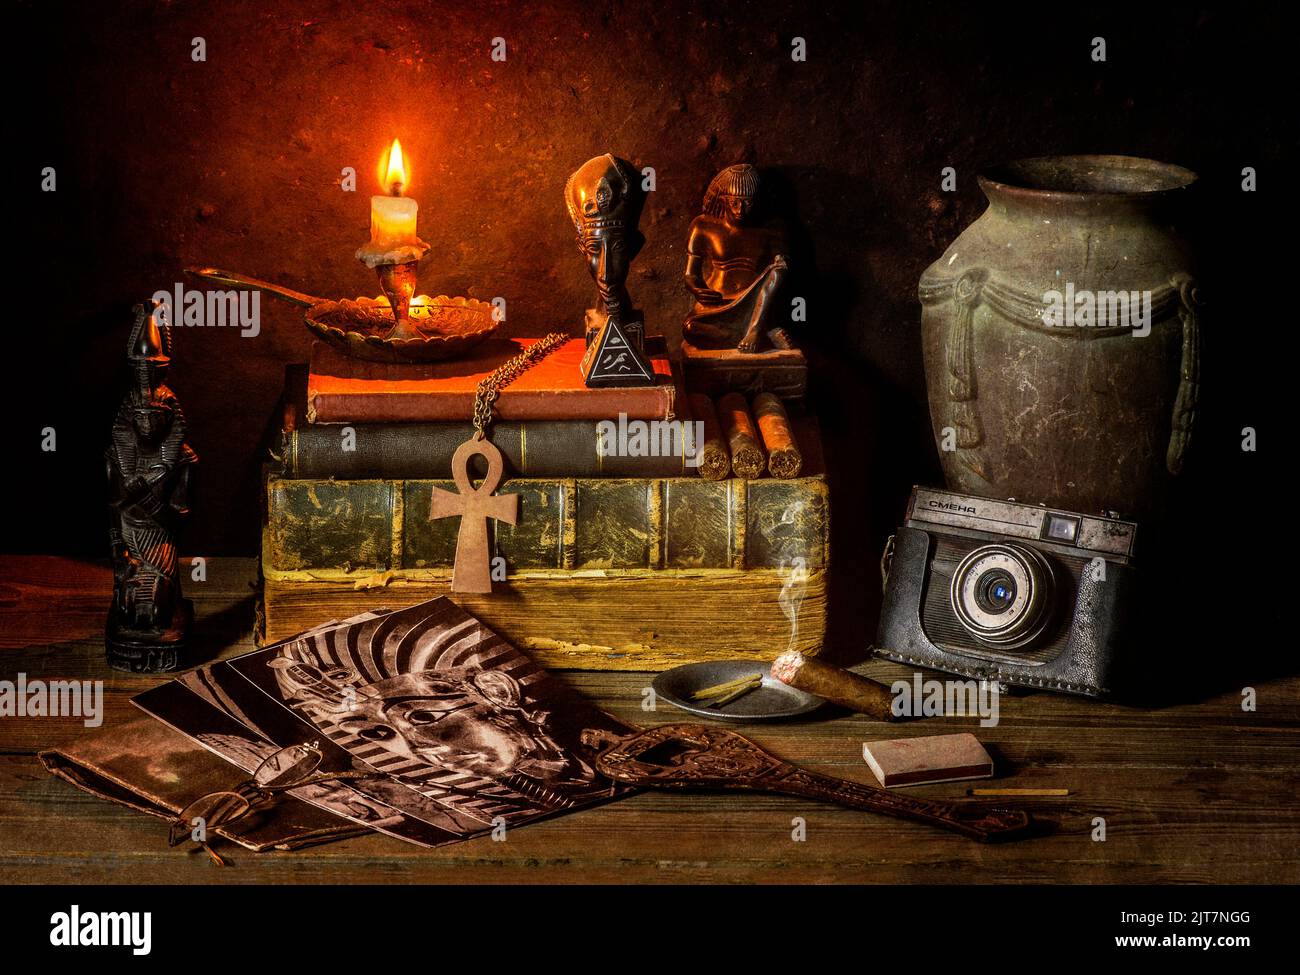 Classic still life with vintage books placed with old jar, illuminated candle, camera, old pictures, cigar and some ancient Egyptian sculptures. Stock Photo